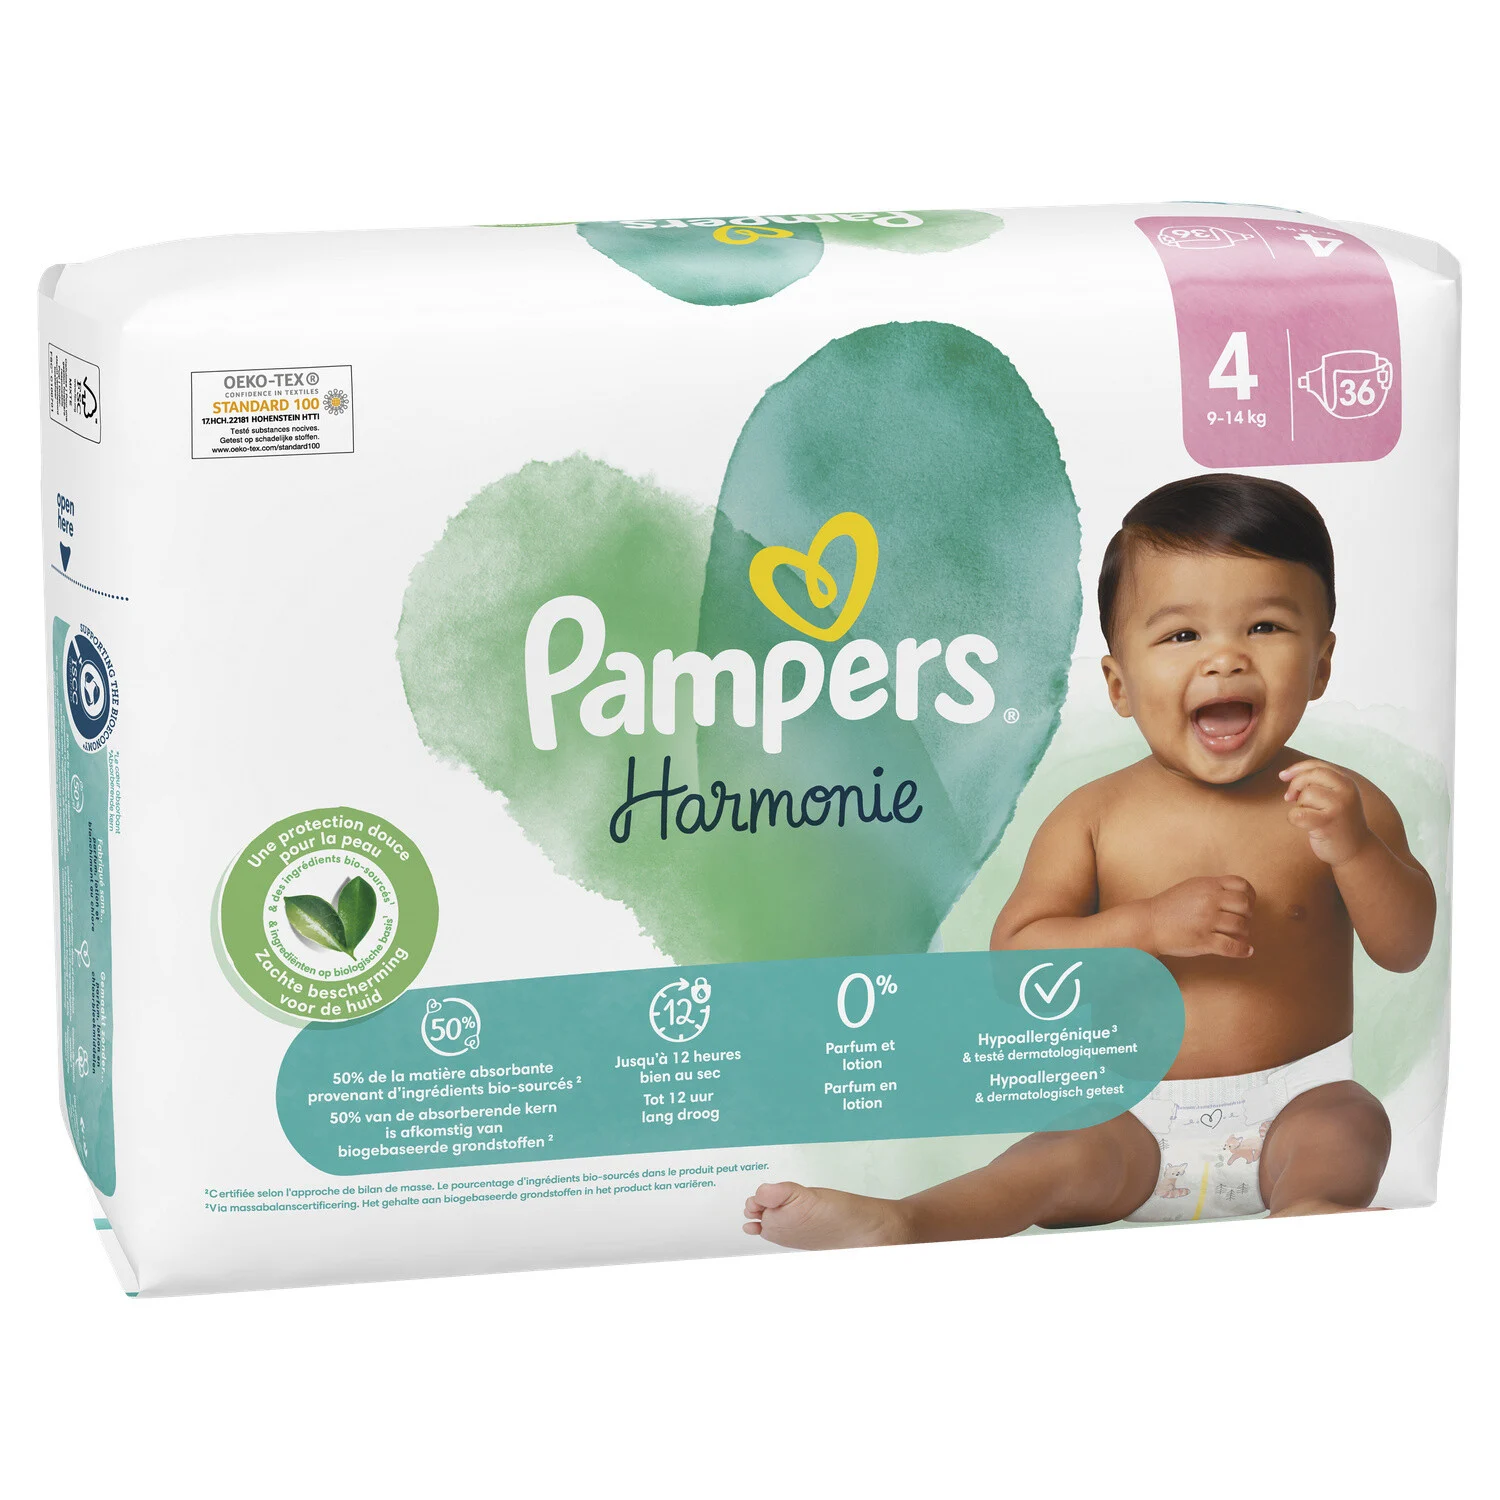 Pampers Couches Harmonie Taille 4 (9-14 kg), 174 Couches Bébé, Pack 1 Mois,  100%